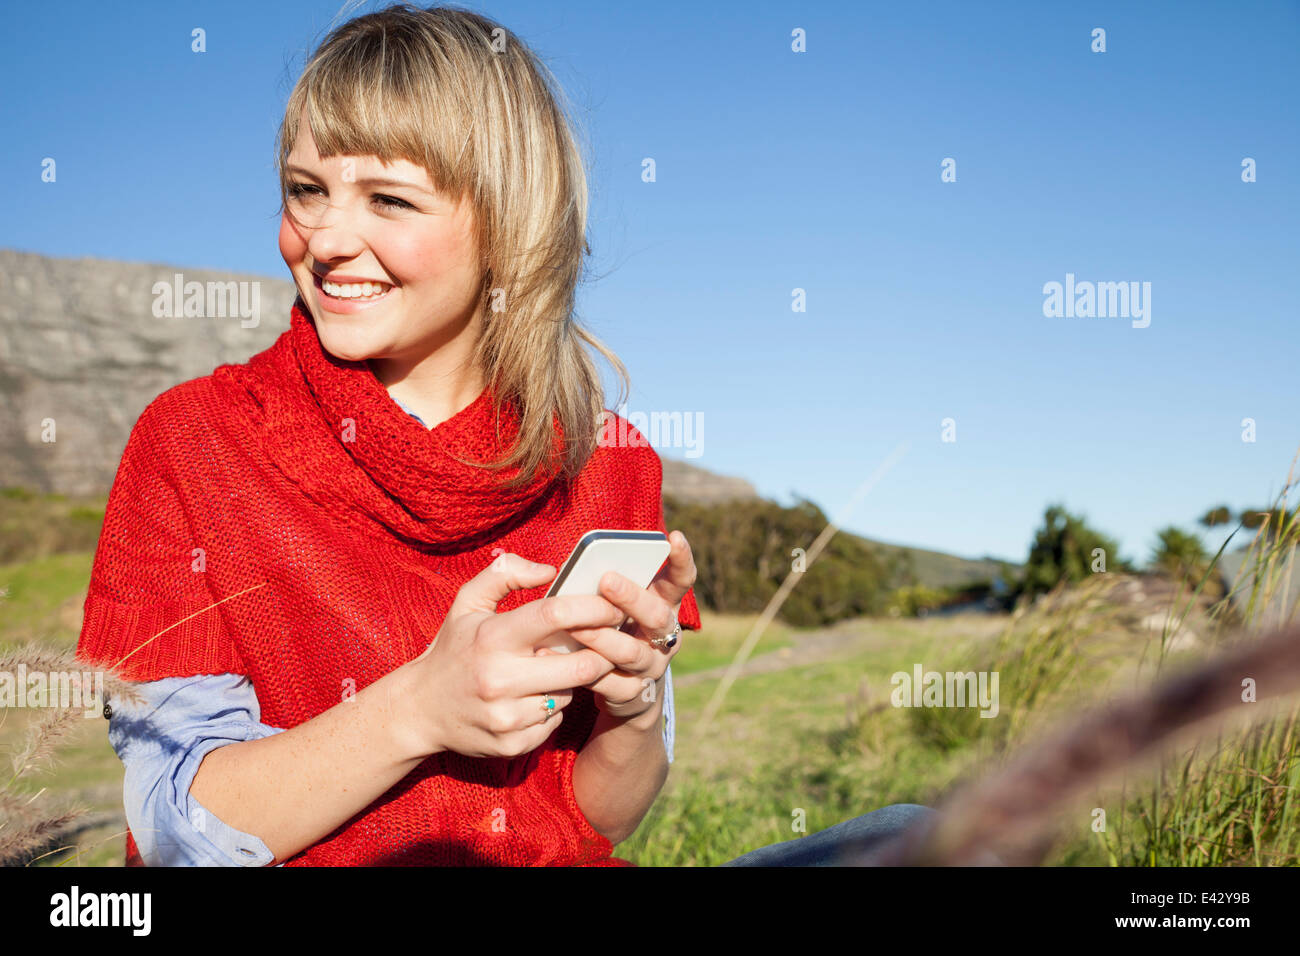 Young woman texting on smartphone in field Stock Photo